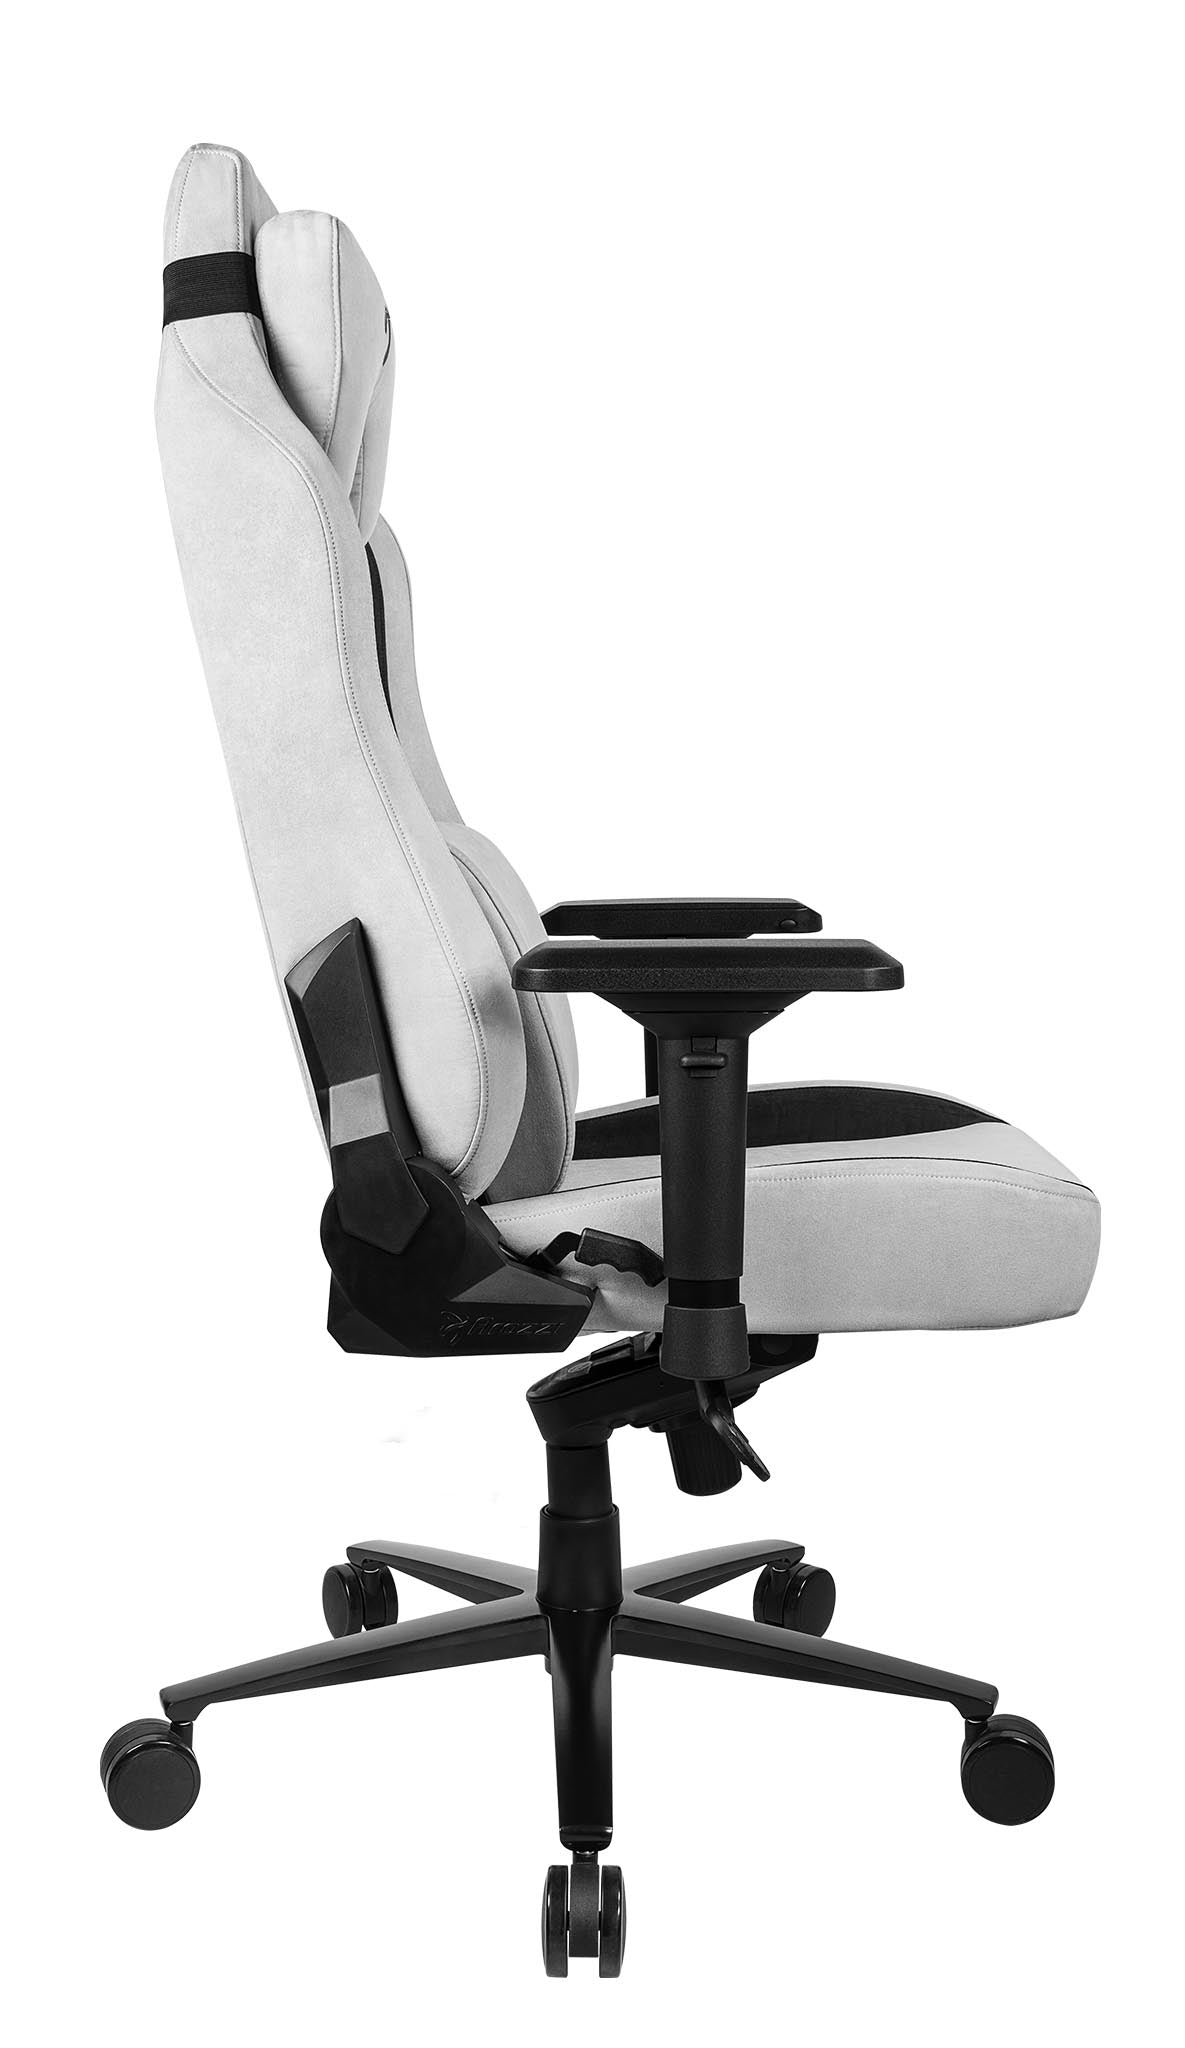 Arozzi Vernazza Supersoft™ Fabric - Light Grey - Level UpArozziGaming Chair850032247207